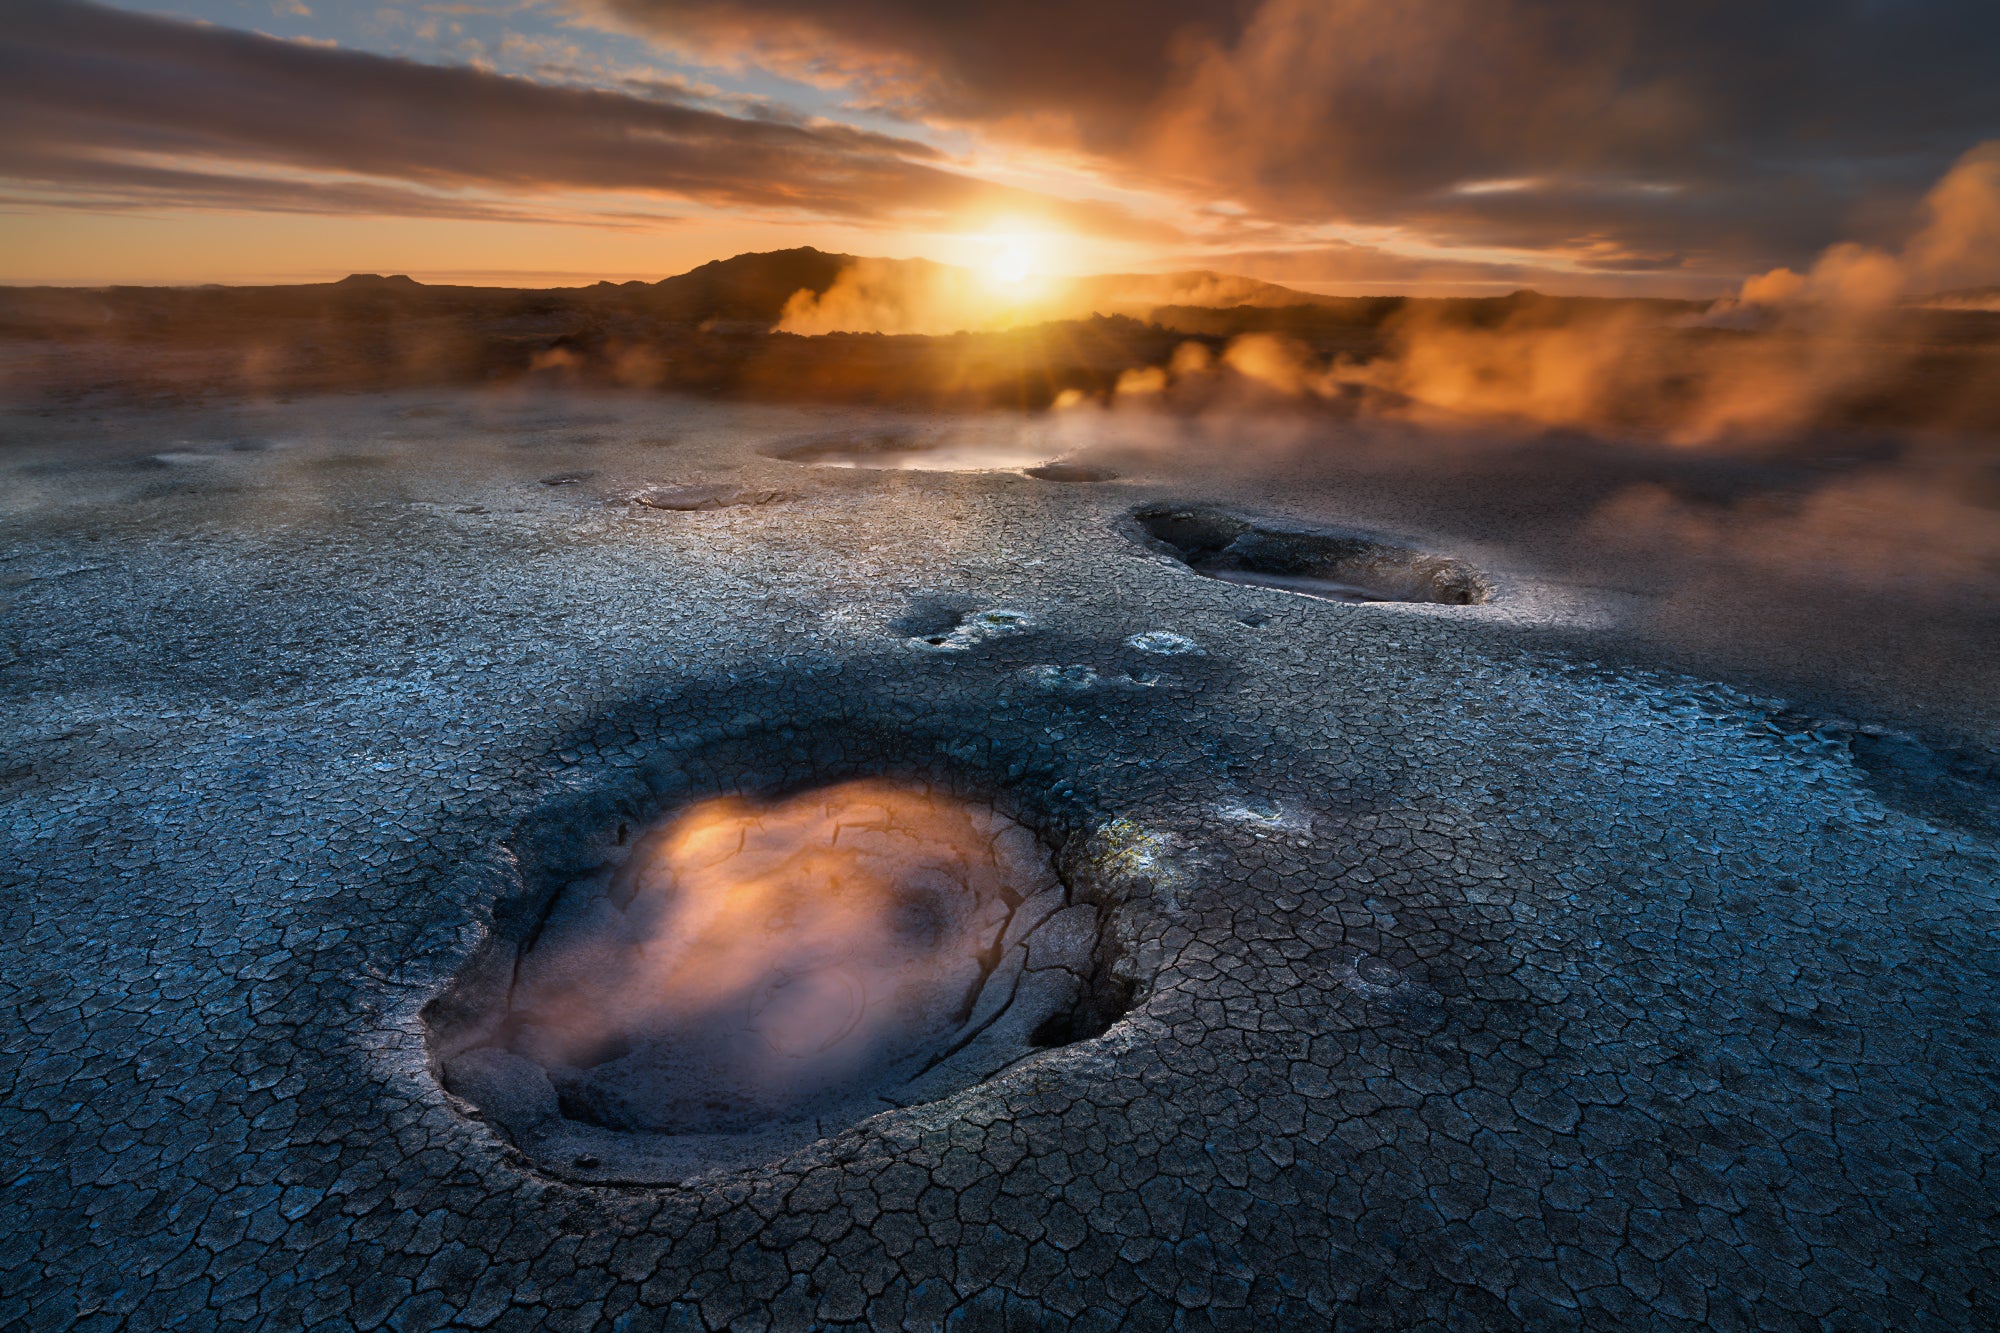 Boiling Earth s image